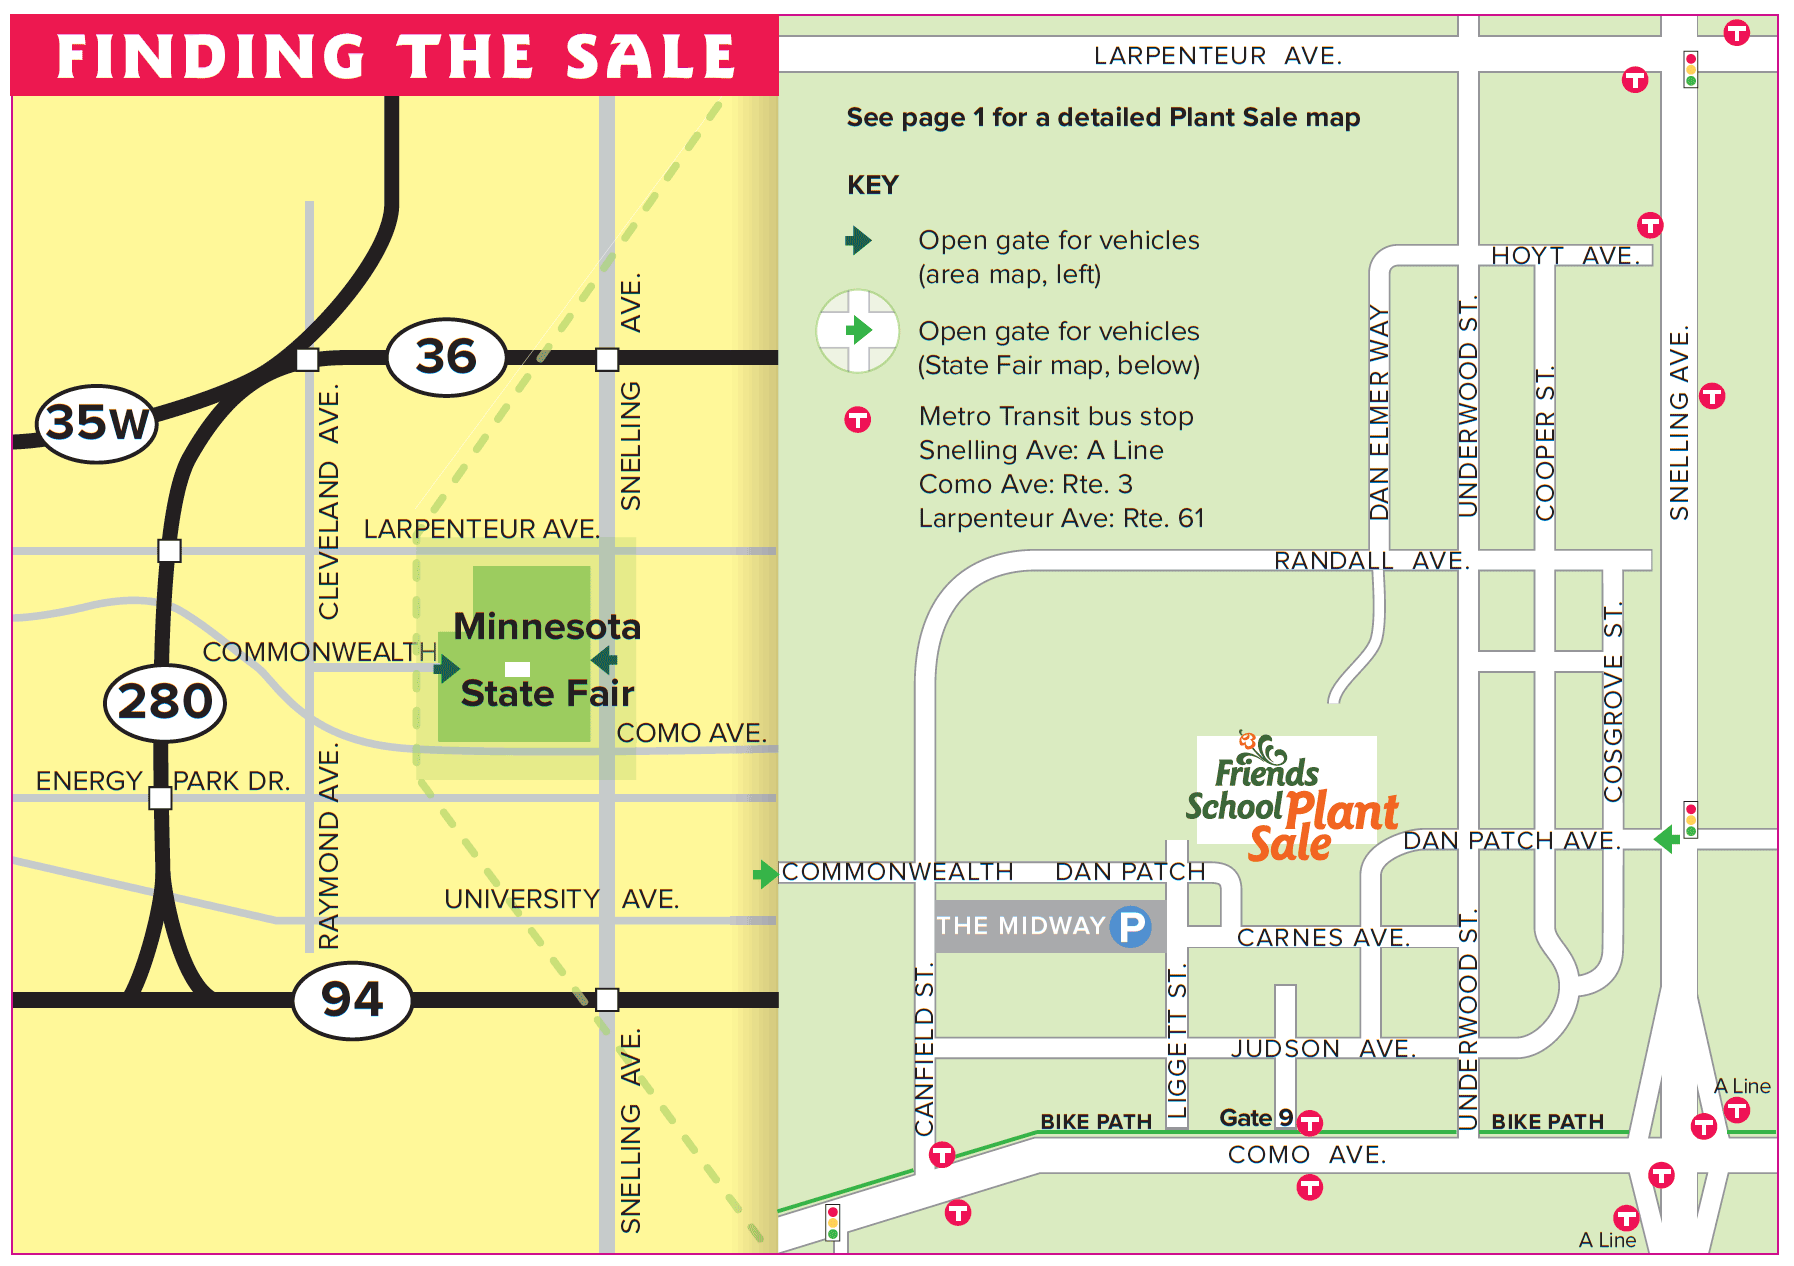 Locator map of area showing Grandstand location at Minnesota State Fair